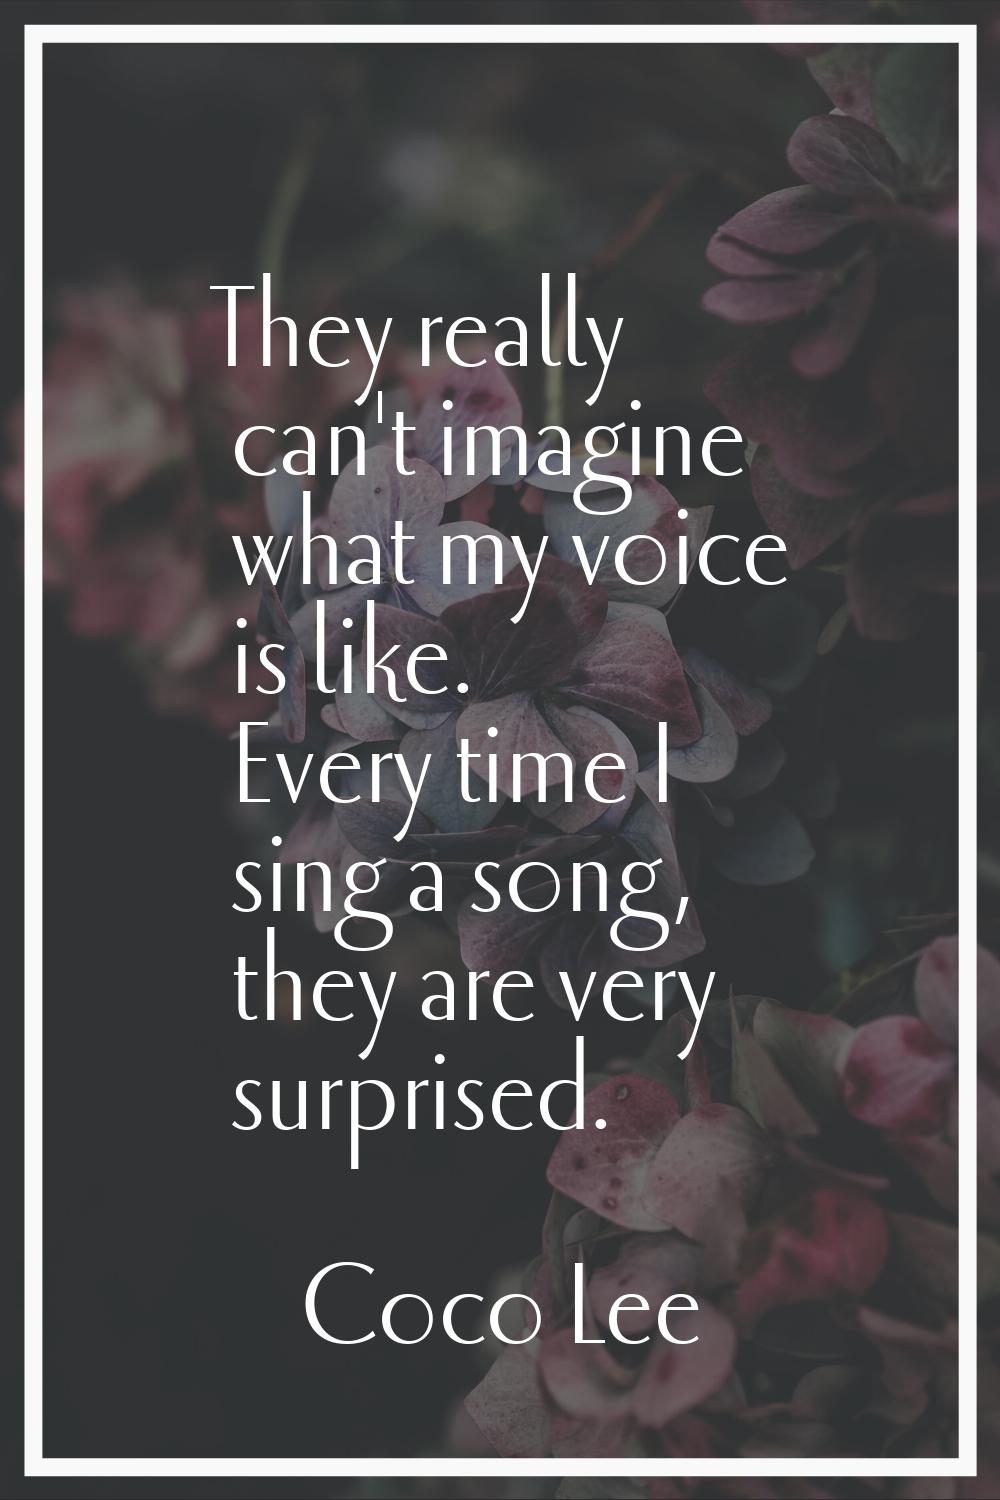 They really can't imagine what my voice is like. Every time I sing a song, they are very surprised.